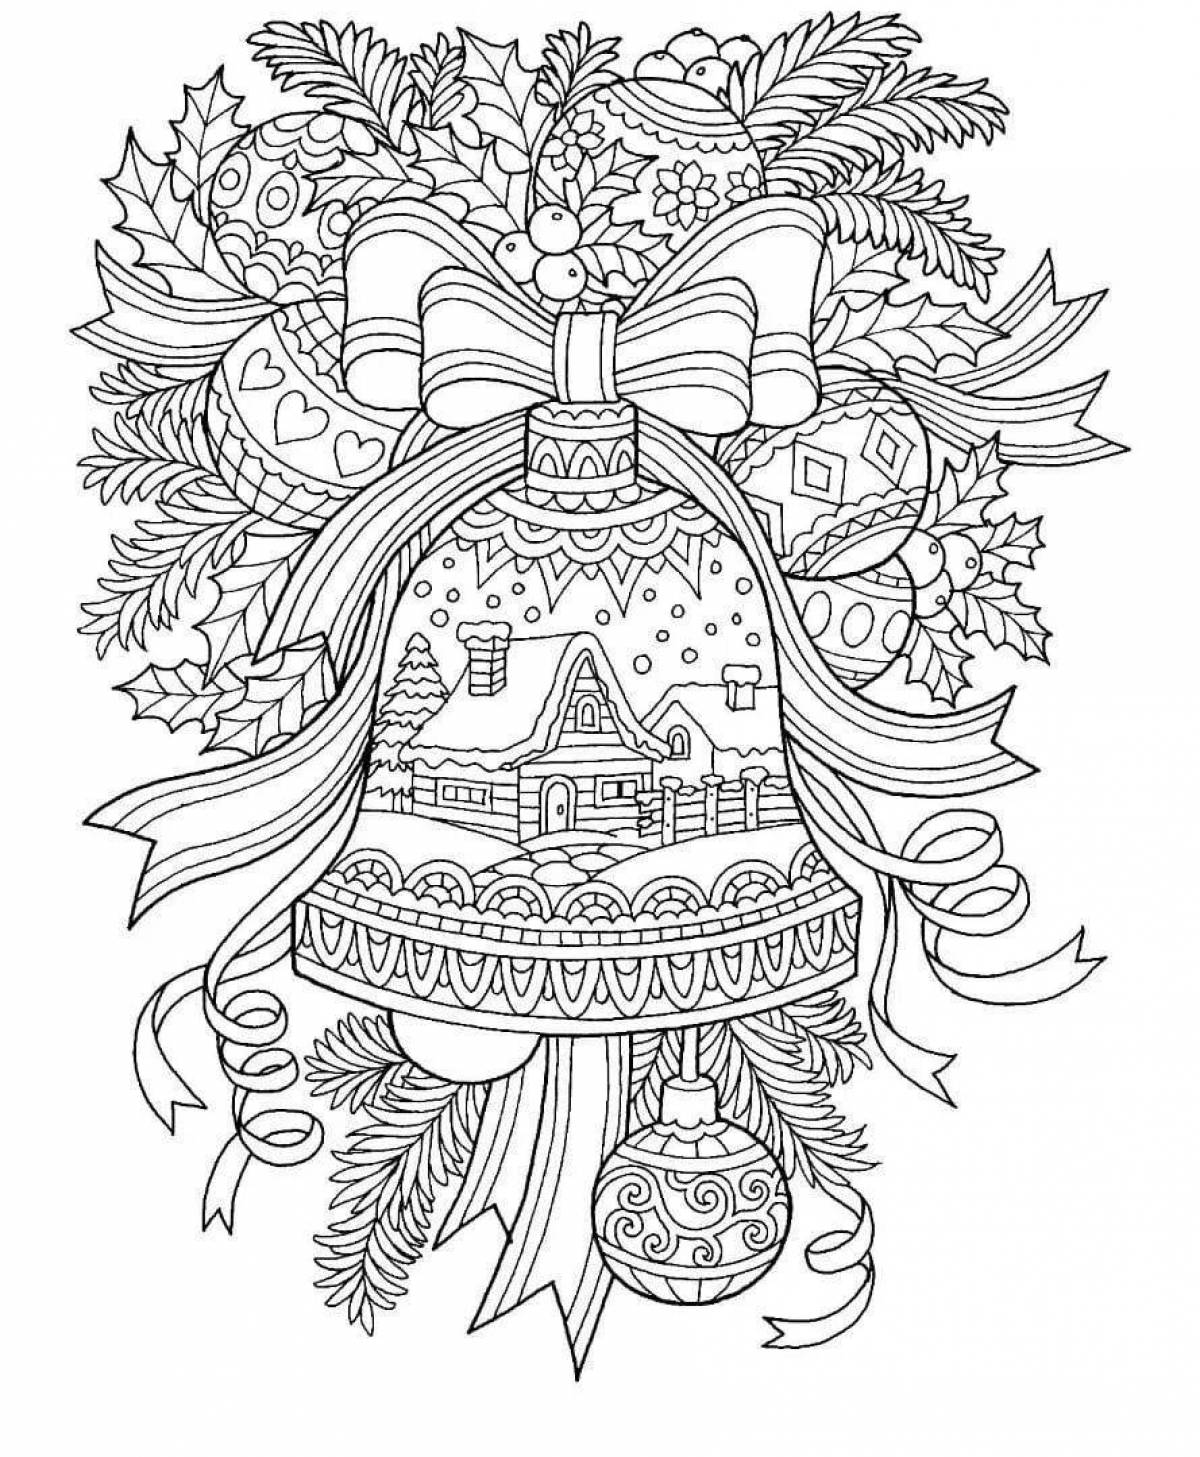 Radiant coloring page hard winter